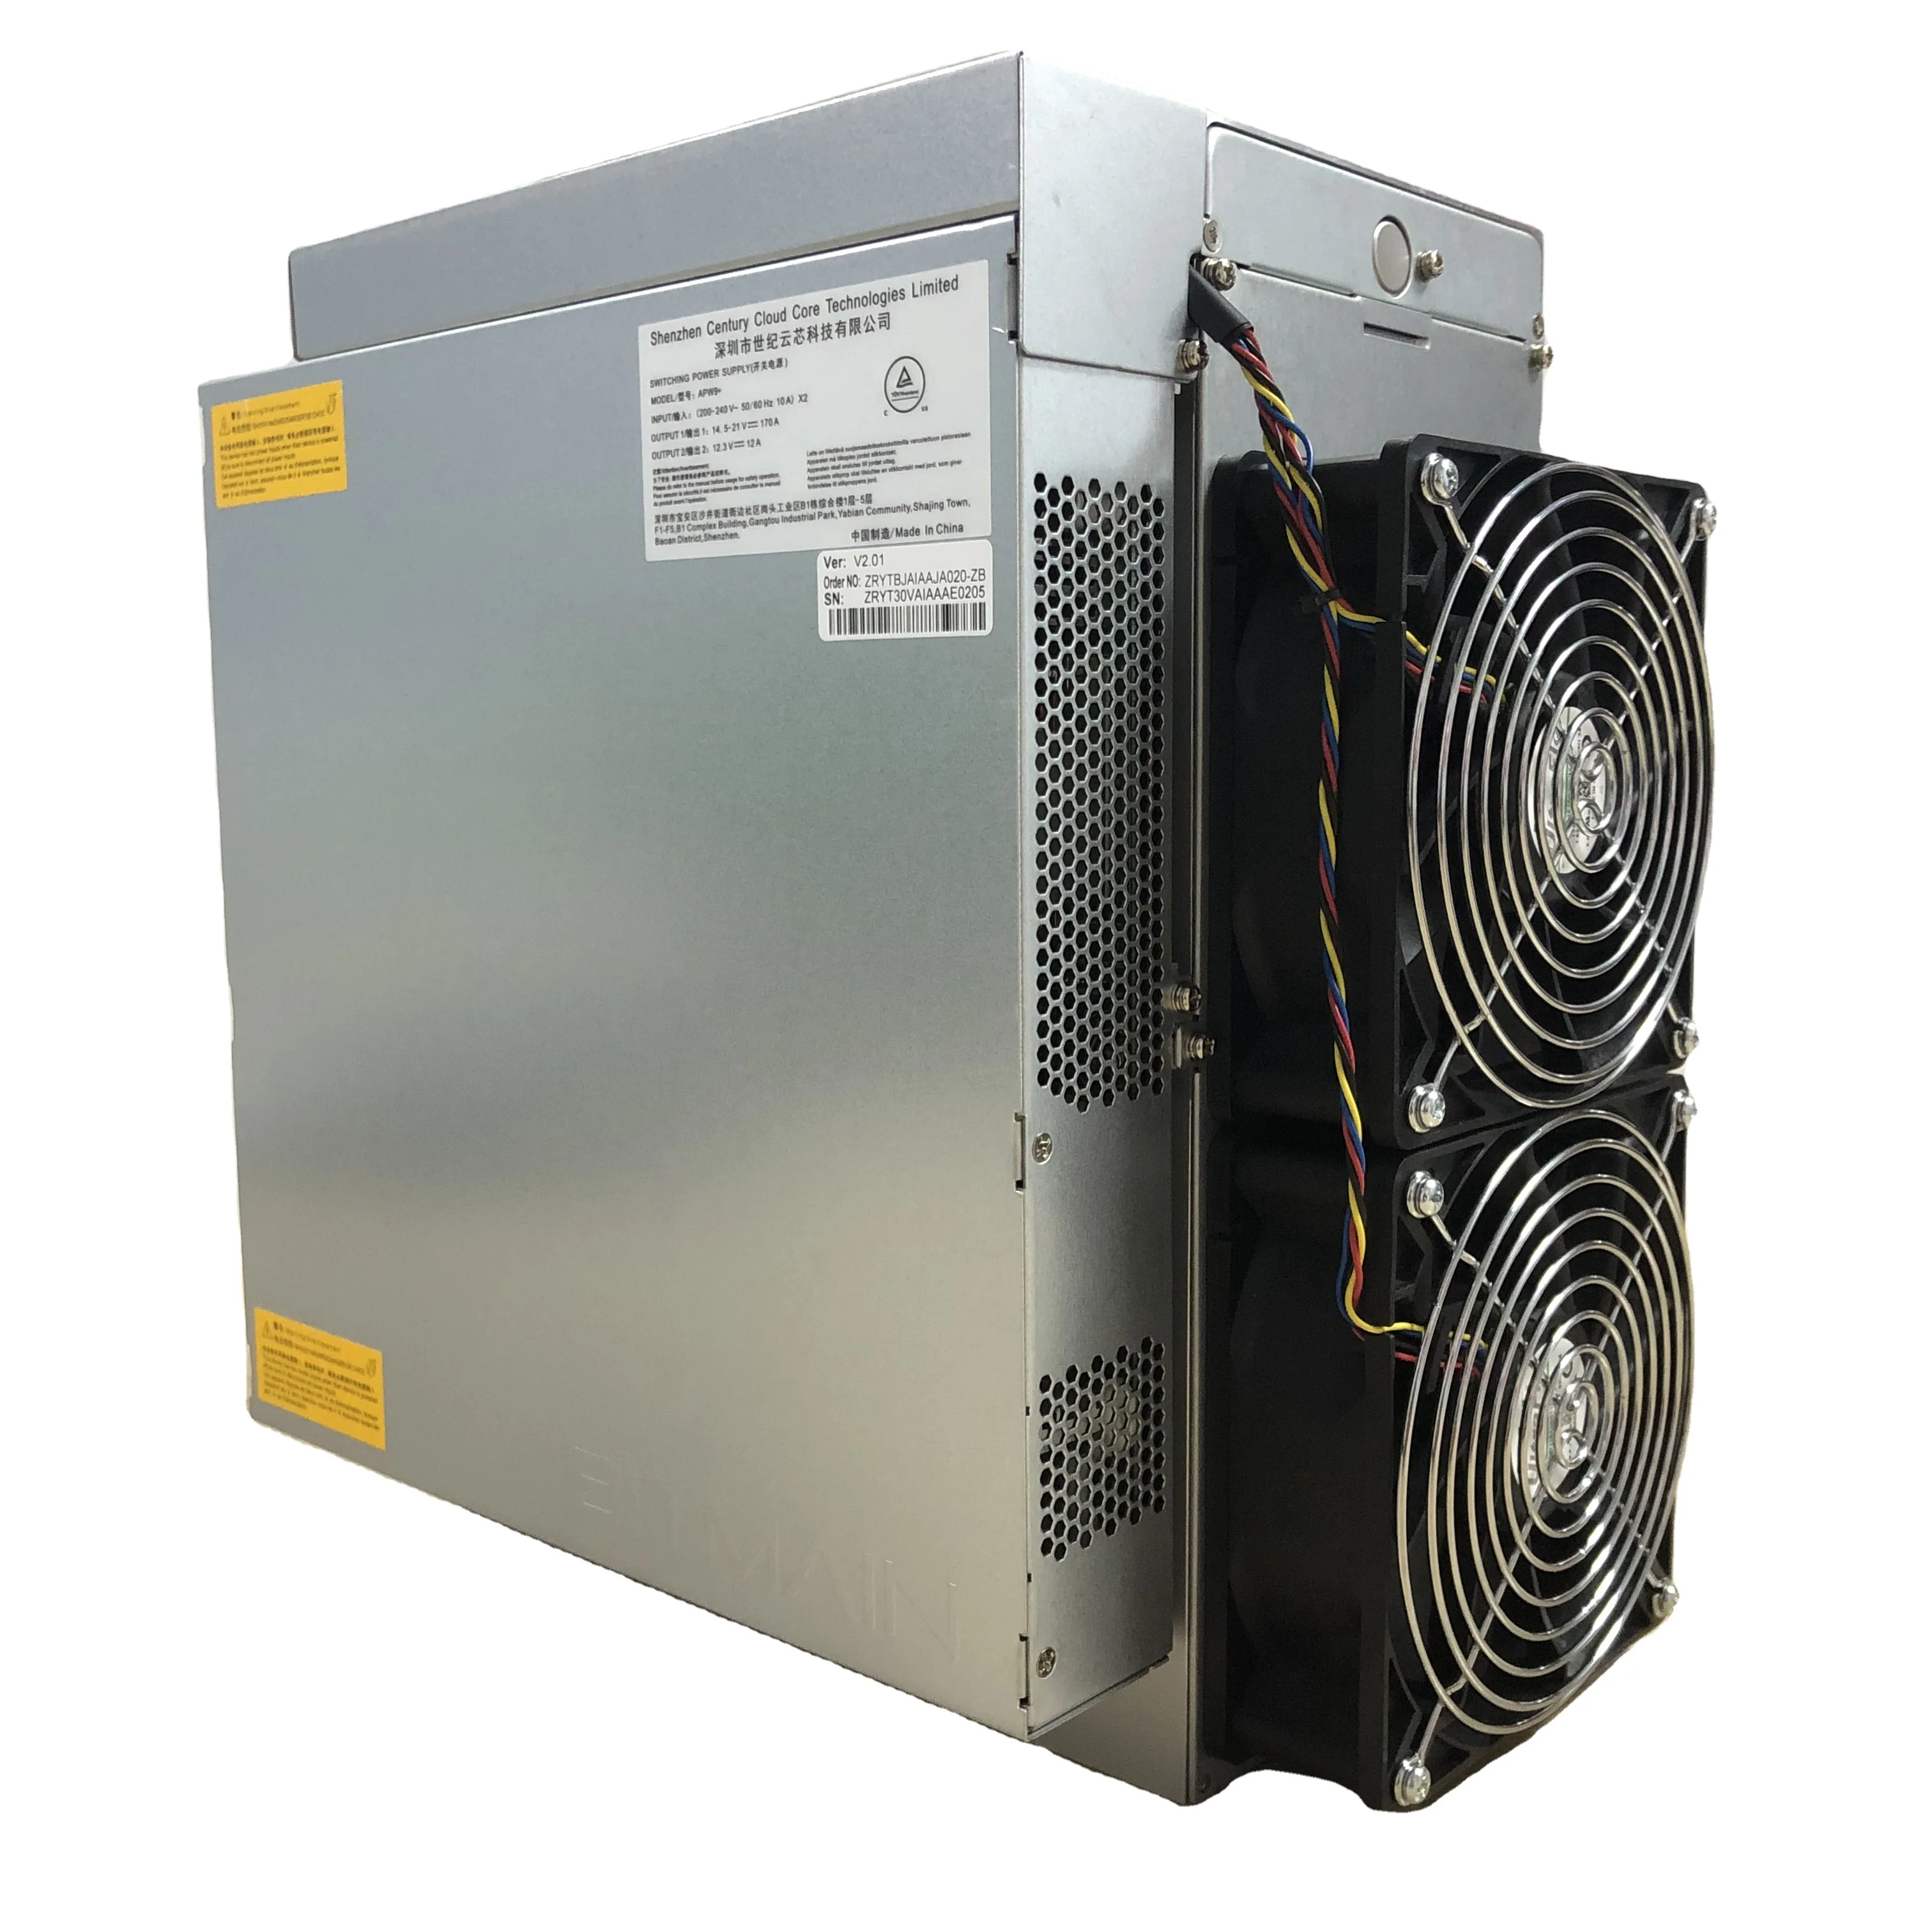 Antminer t21 190 th s. Antminer s19 Pro 110th. Асик s19 Pro. ASIC Antminer s19 Pro. Bitmain Antminer s19 Pro.